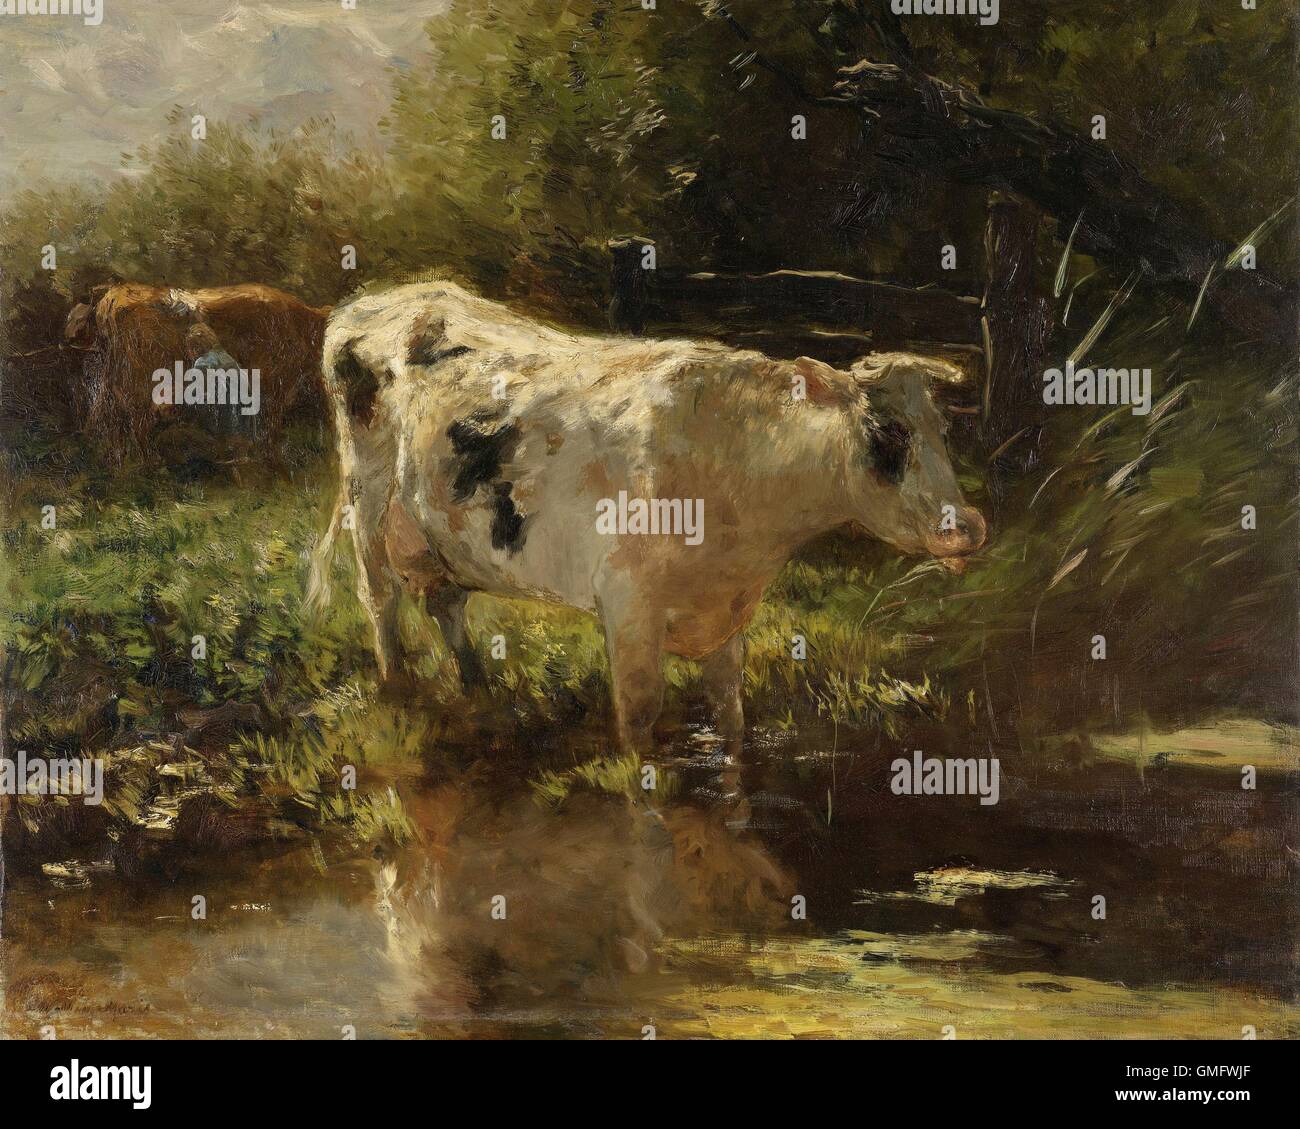 Cow Beside a Ditch, by Willem Maris, c. 1885-95, Dutch painting, oil on canvas. In the background, a farmer milks a cow in the field. (BSLOC 2016 1 308) Stock Photo